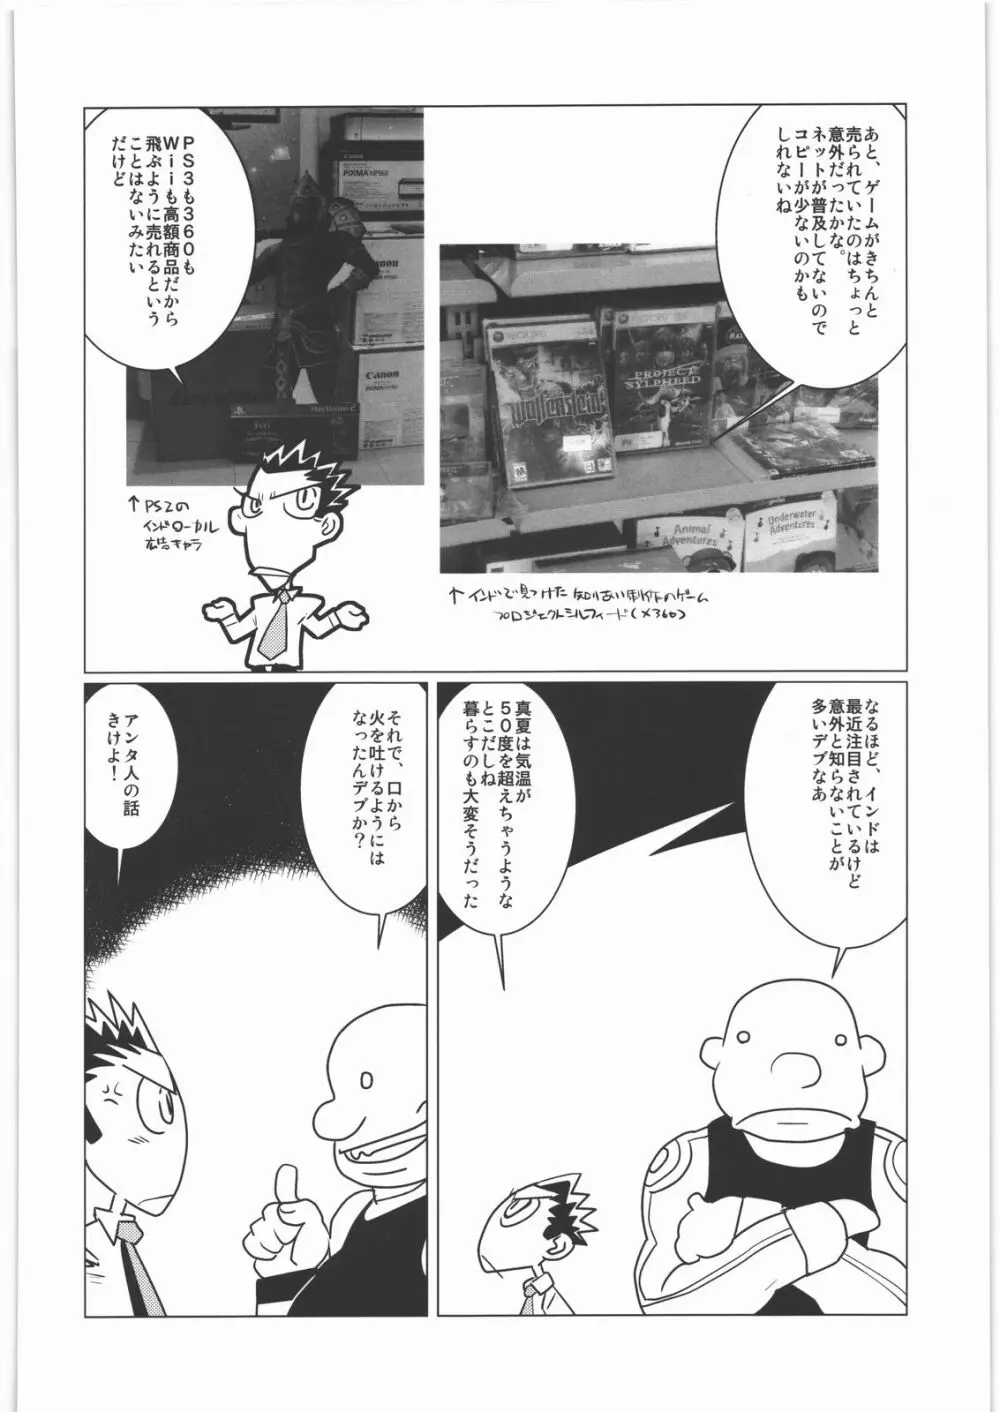 甲冑通信 弐之號 Page.53